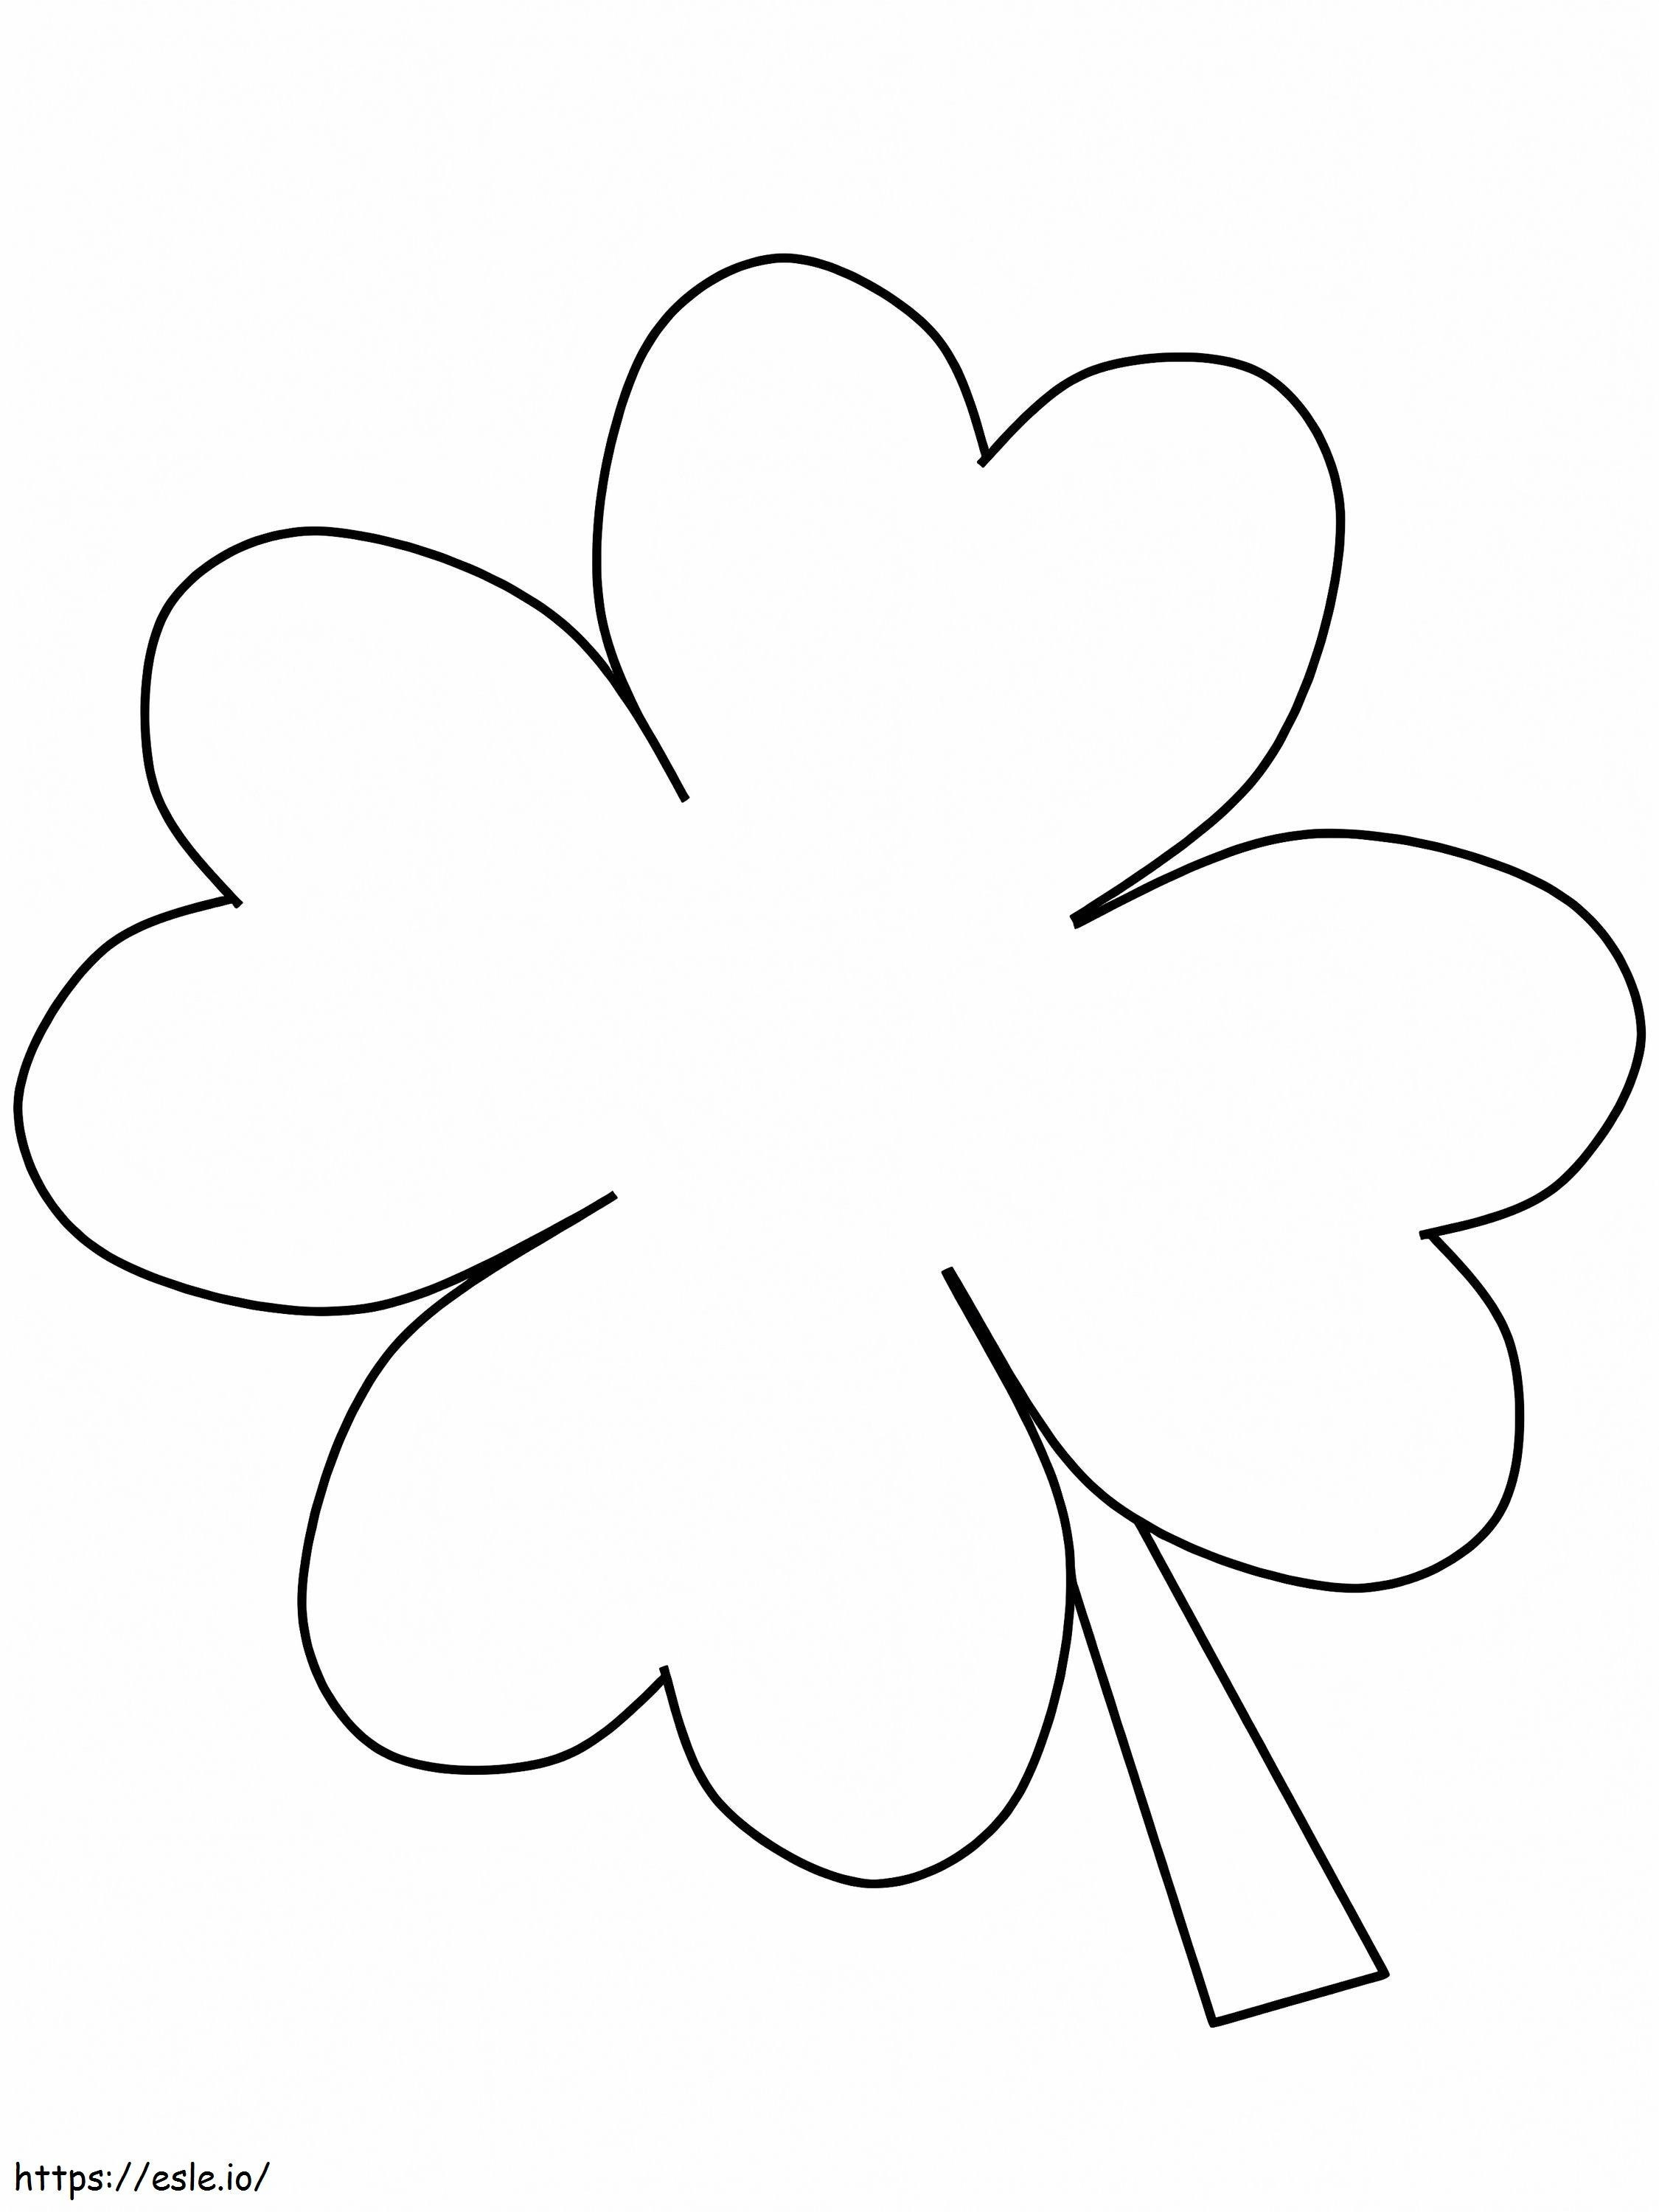 Four Leaf Clover 5 coloring page